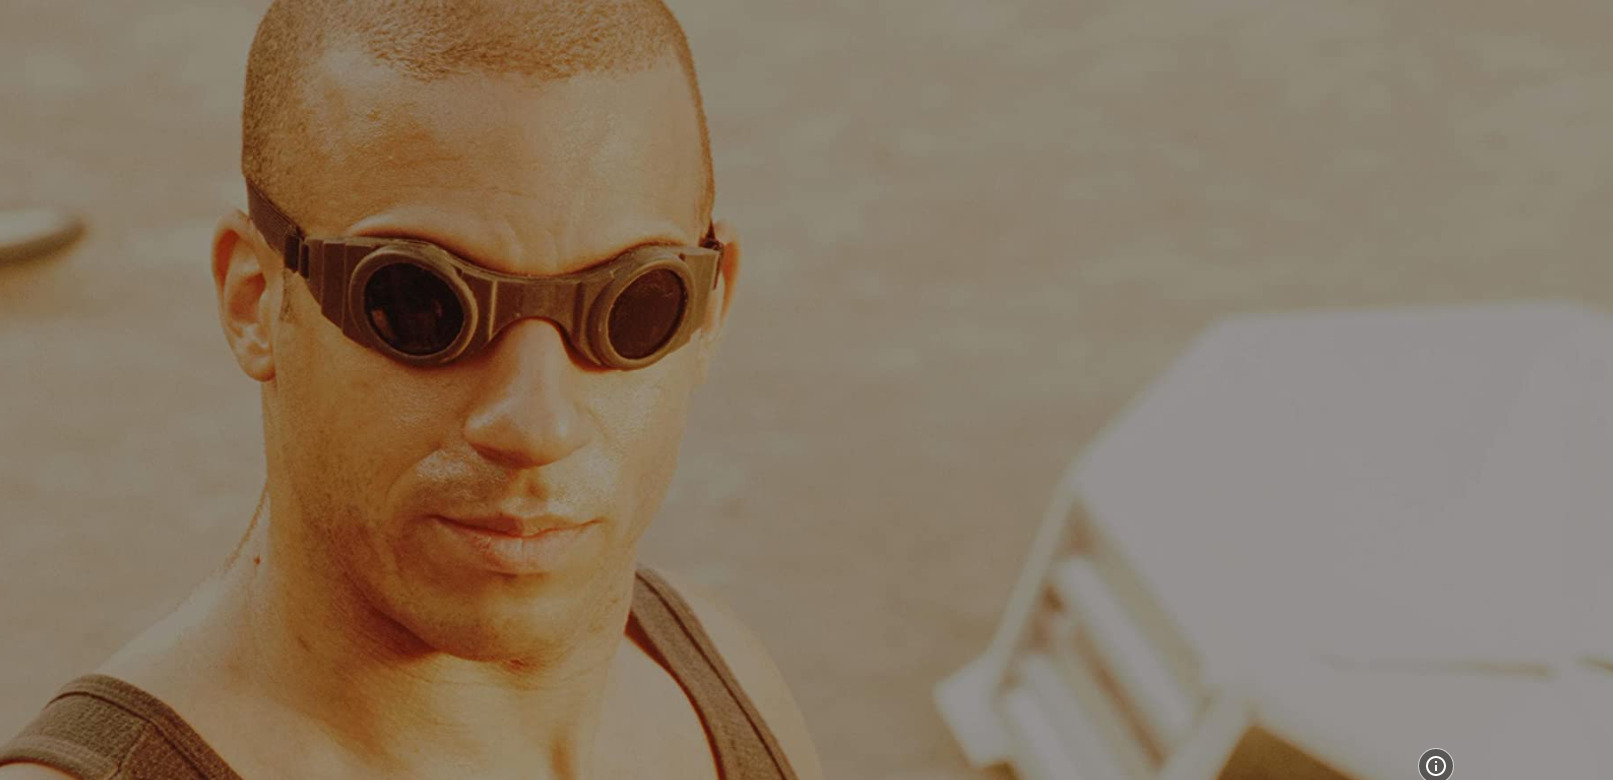 Pitch Black Ending, Explained: Does Riddick Betray Carolyn?